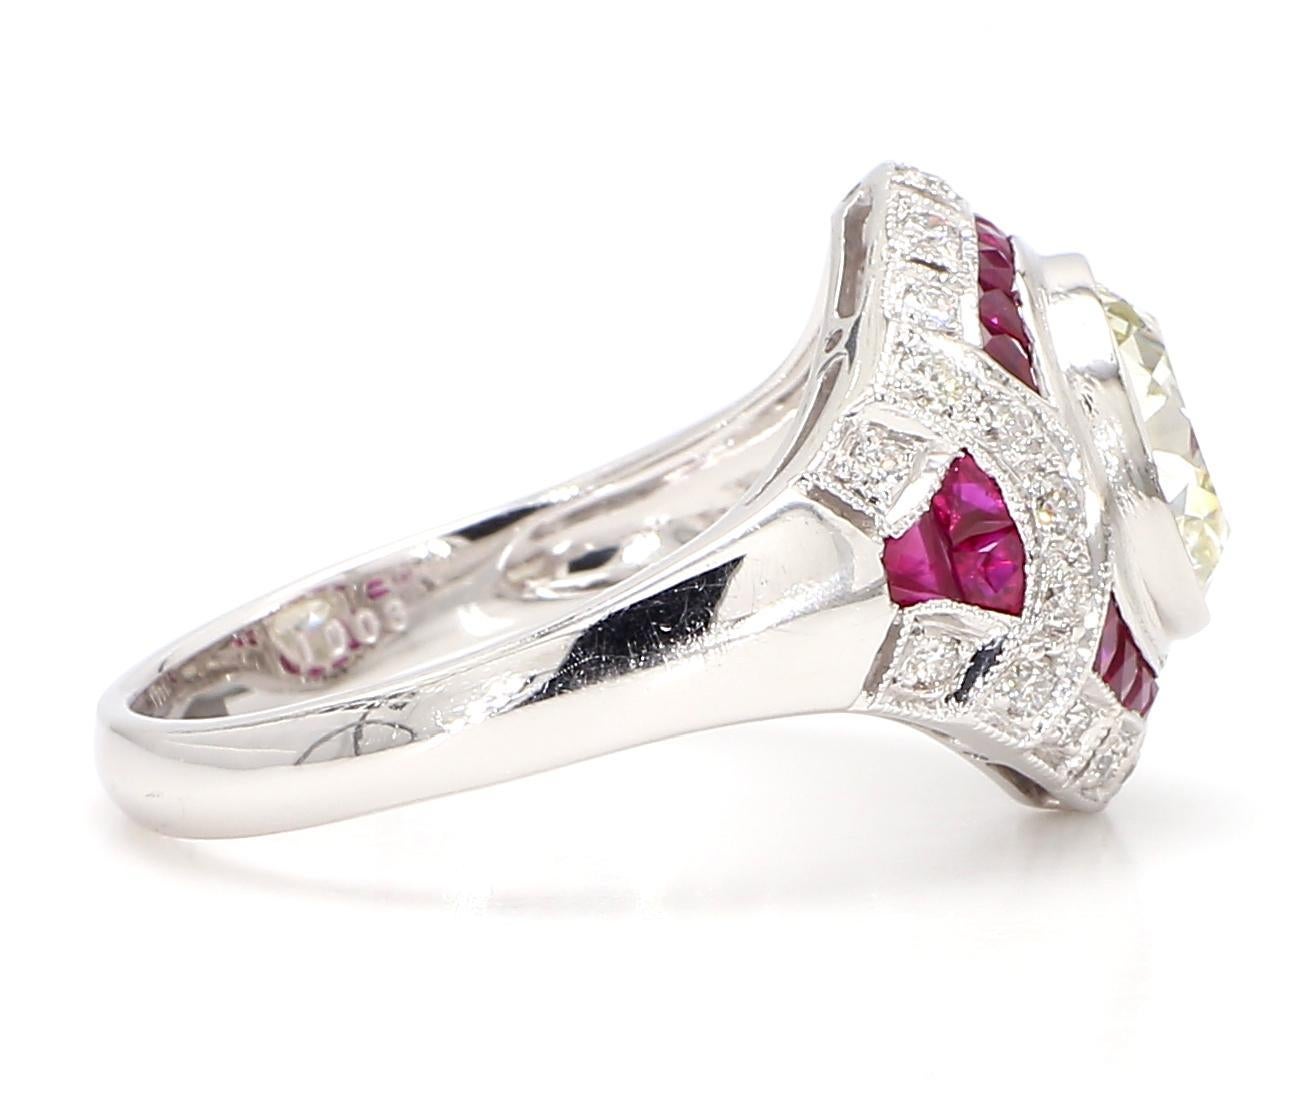 Women's GIA Certified 2.56 Carat Diamond and 1.15 Carat Ruby Art Deco Platinum Ring For Sale